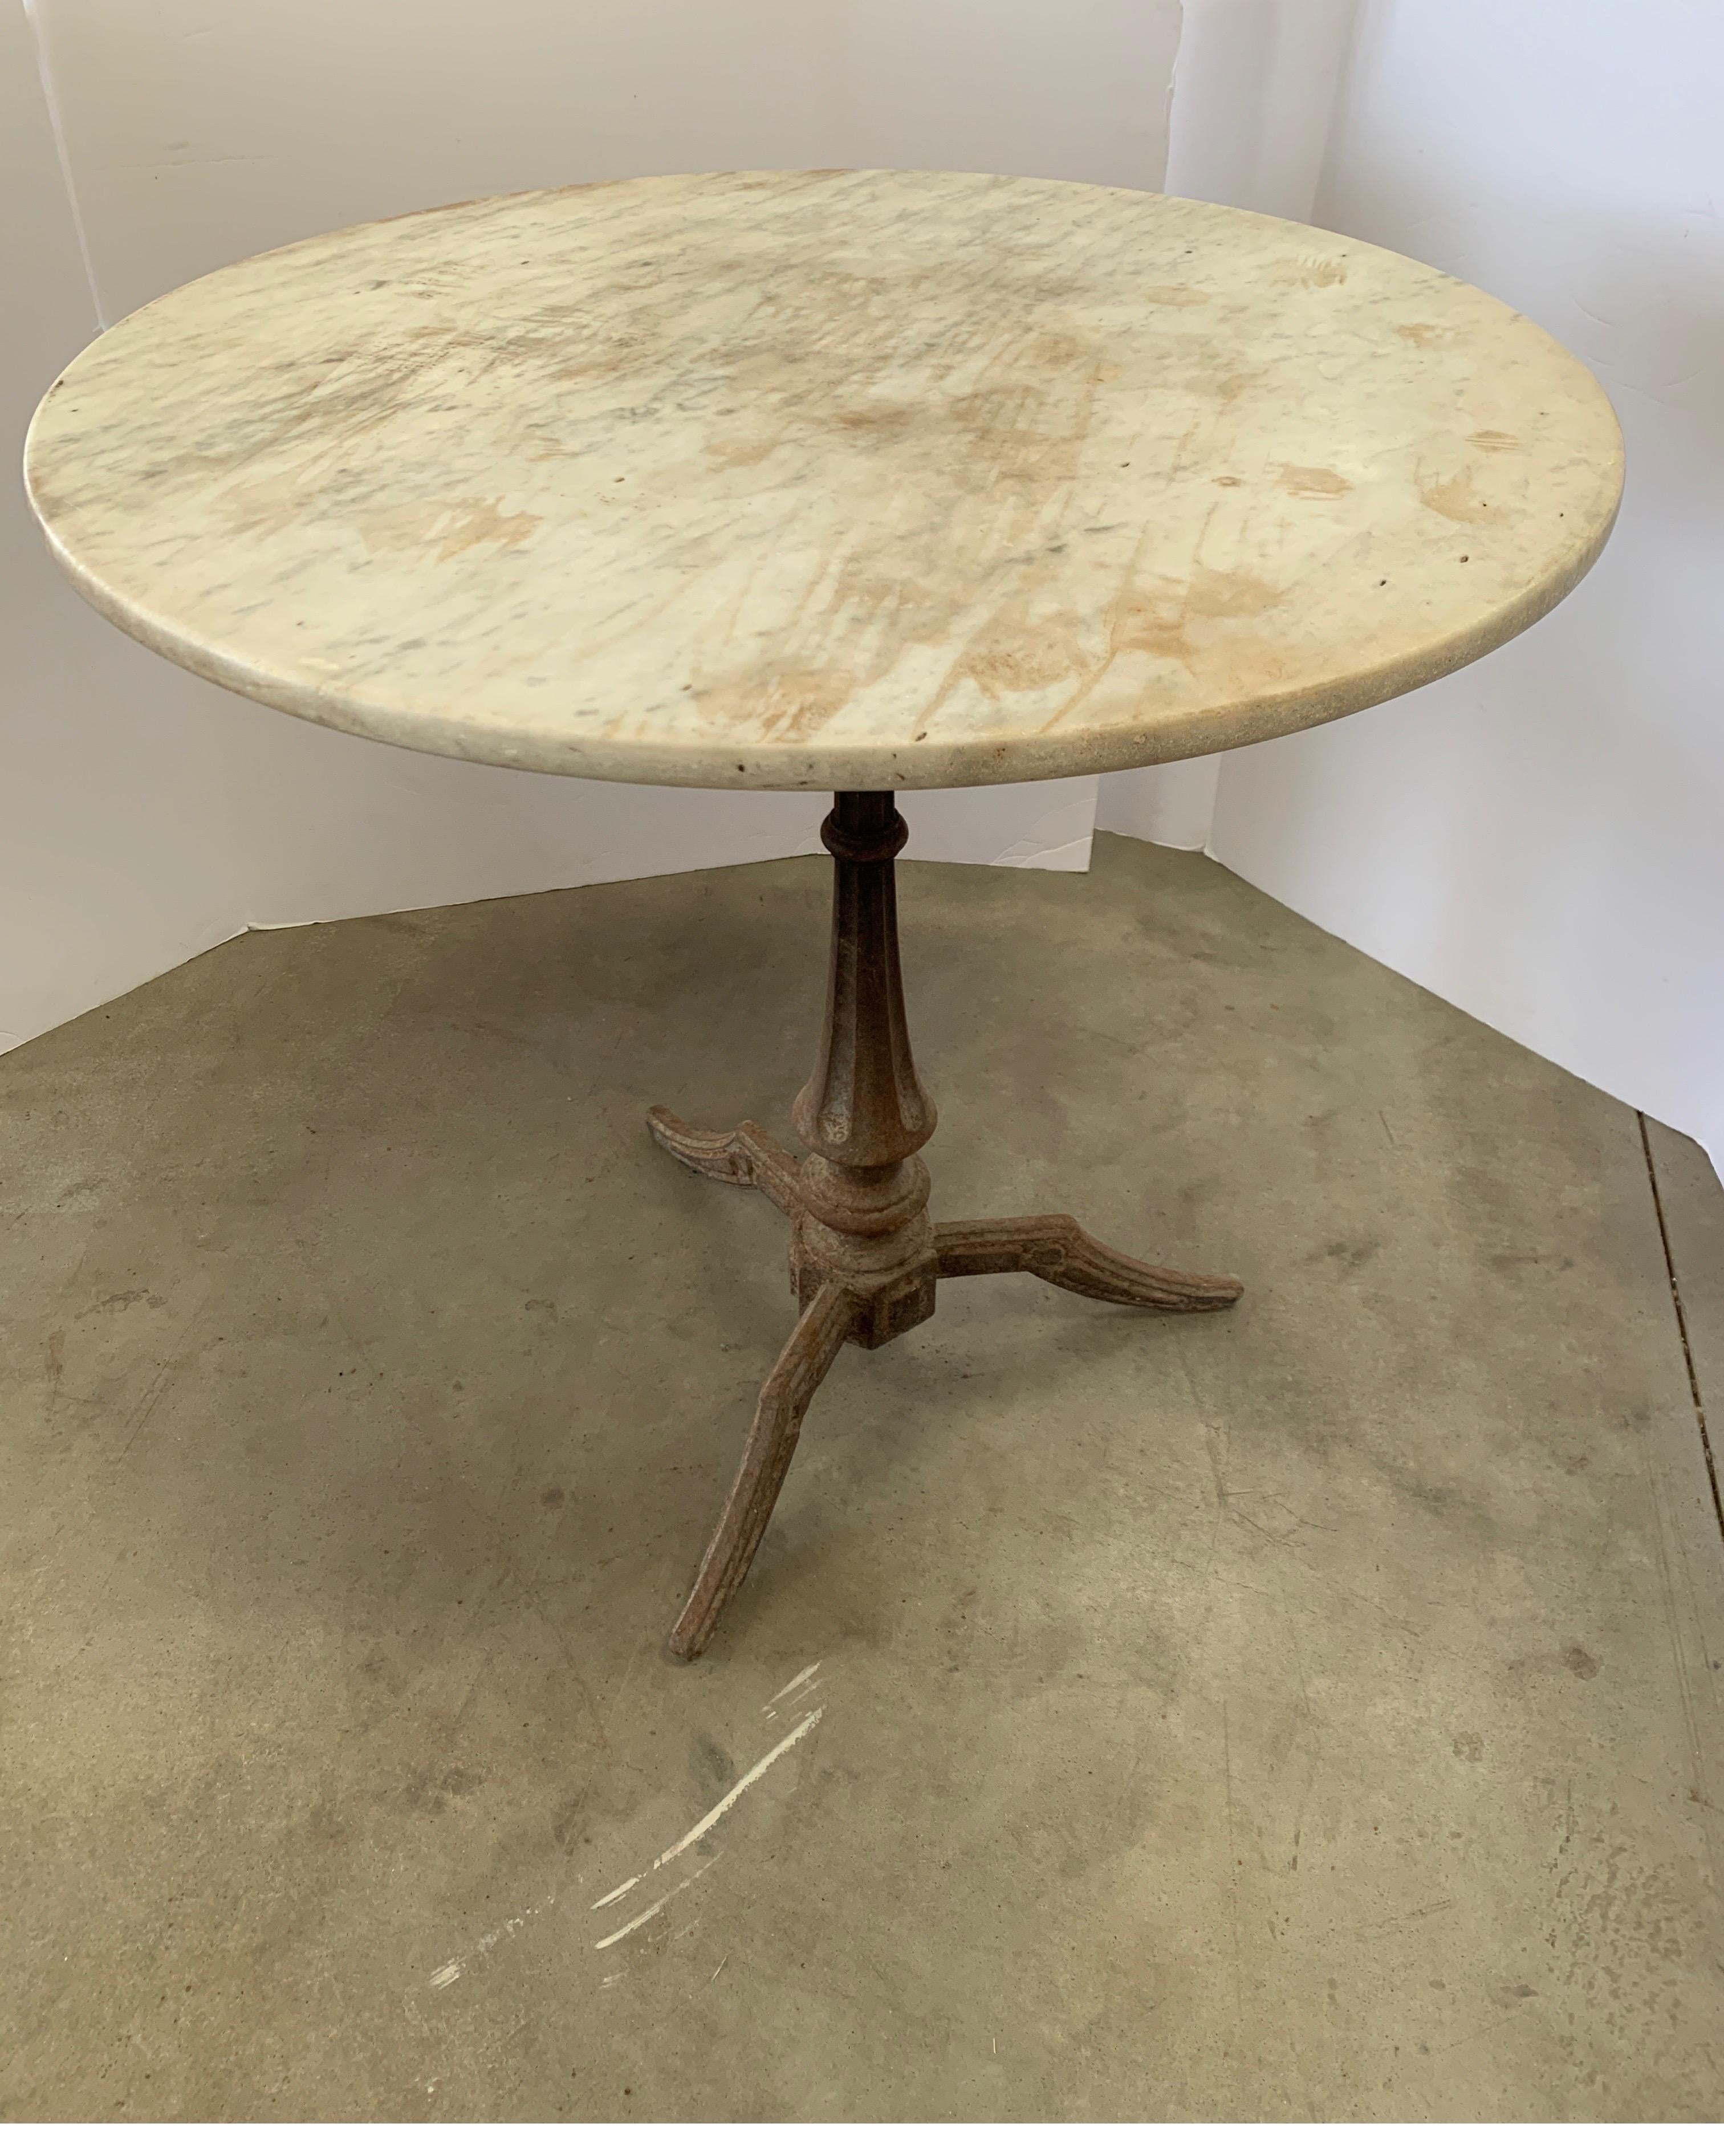 This is a great antique bistro table with iron base and it’s original top. It has had lots of use, therefore you can see it in the stains and wear on the marble. It creates wonderful character with loads of past conversation.